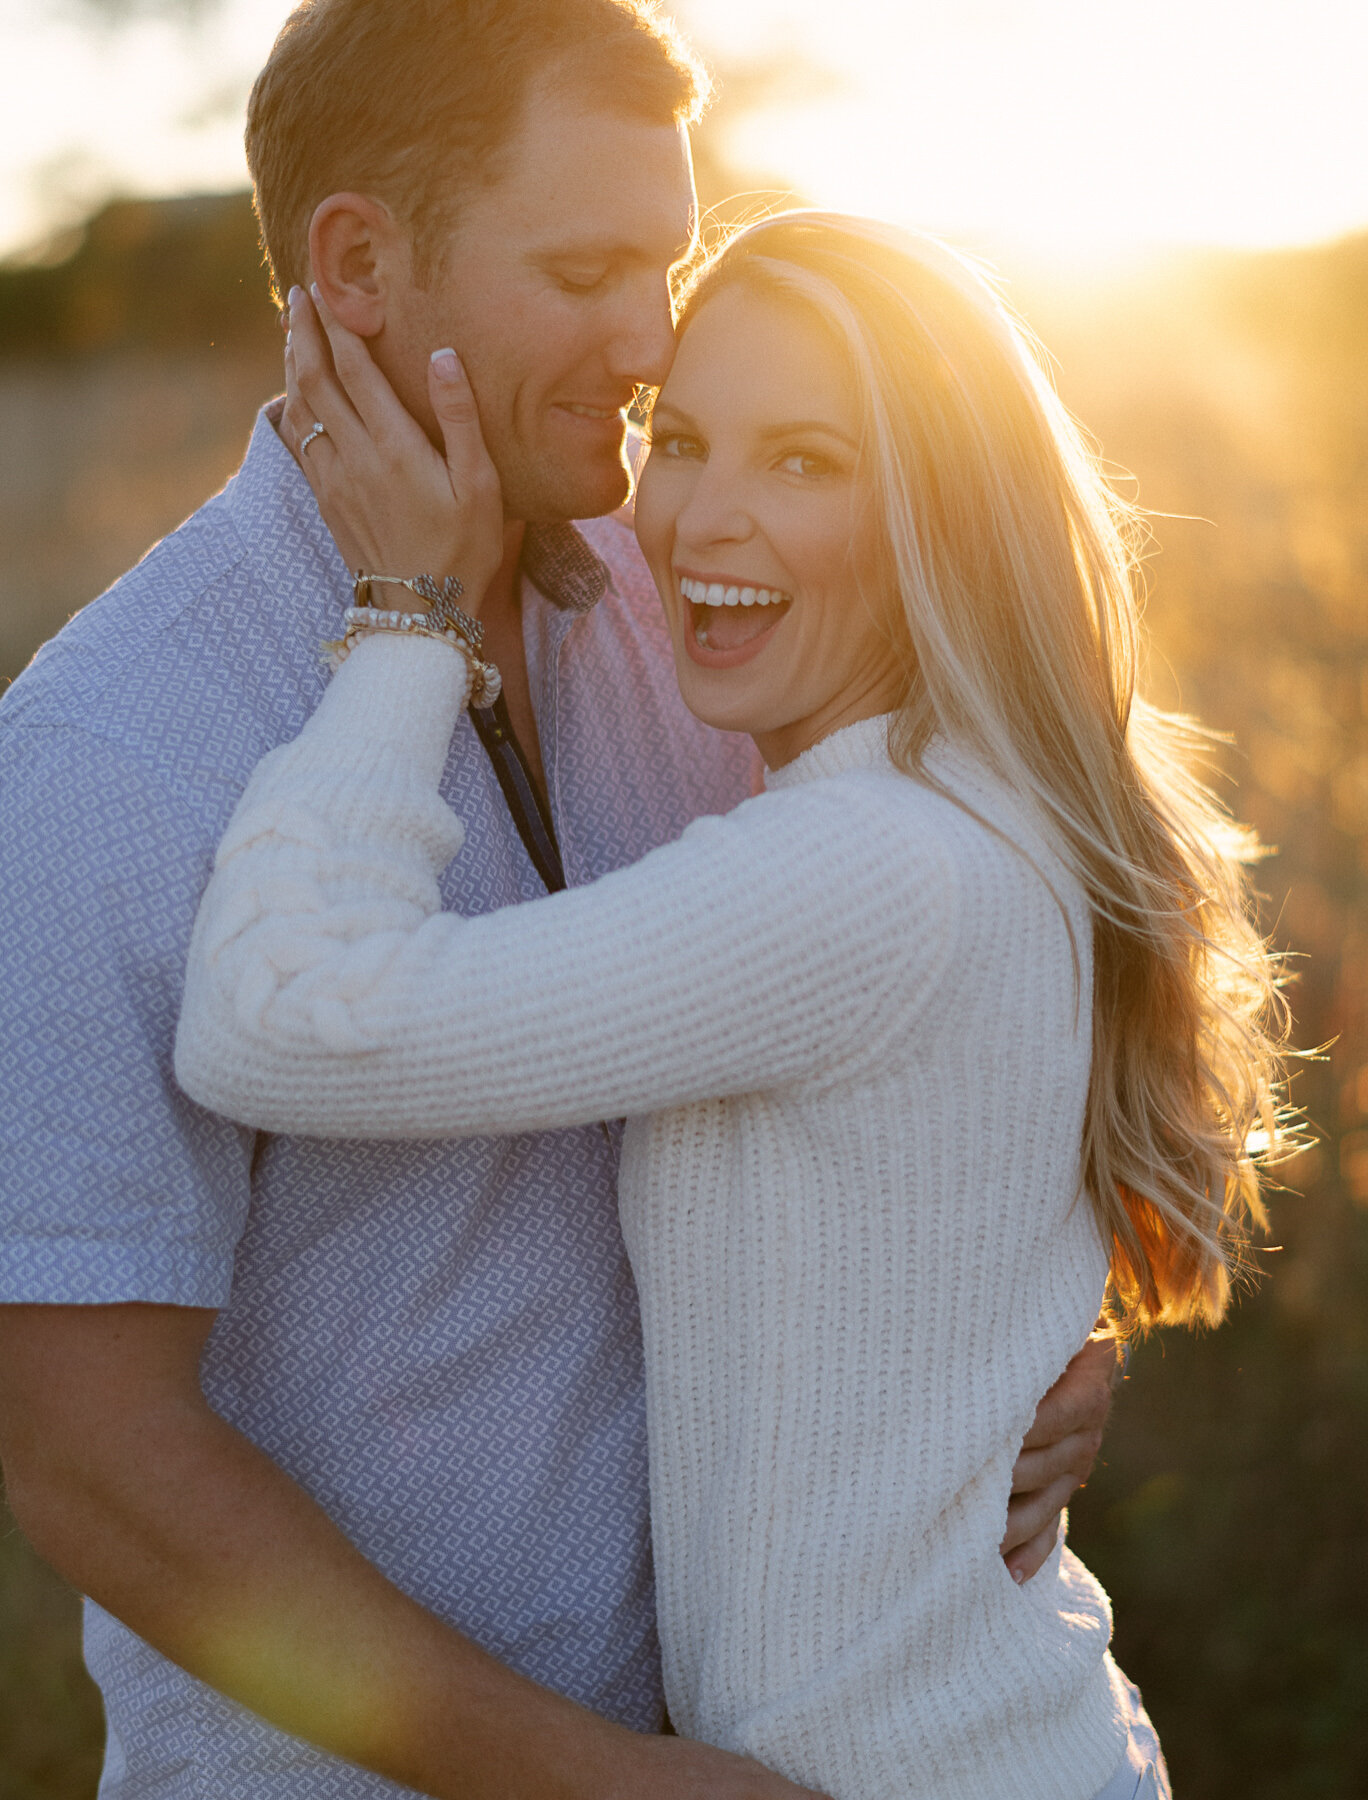 Sunglow Photography Bok Tower Gardens Engagement Session